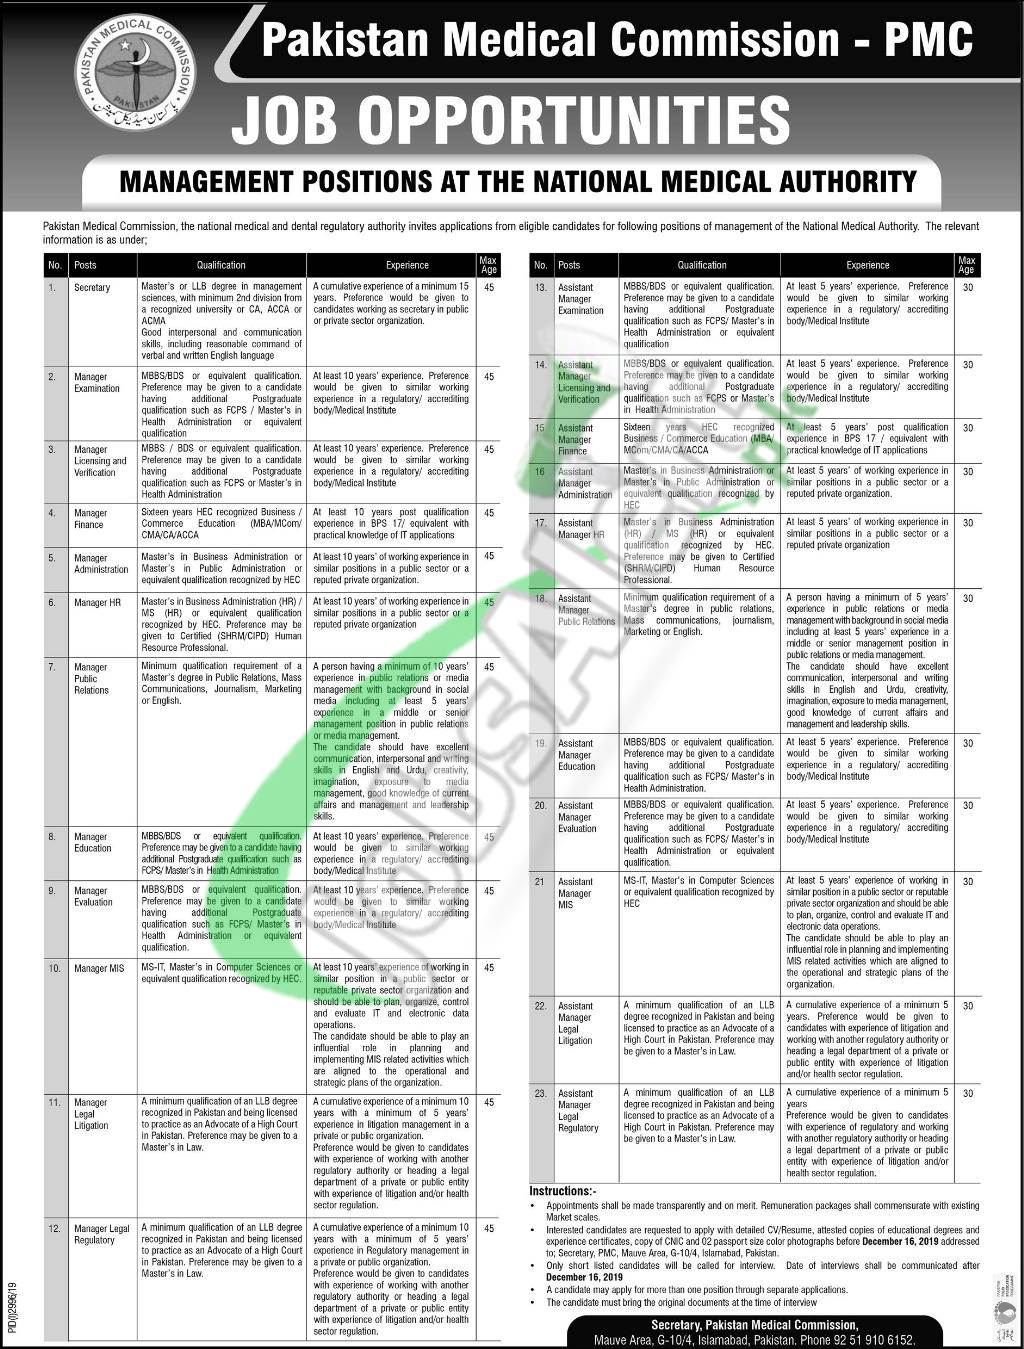 Pakistan Medical Commission Job Opportunities